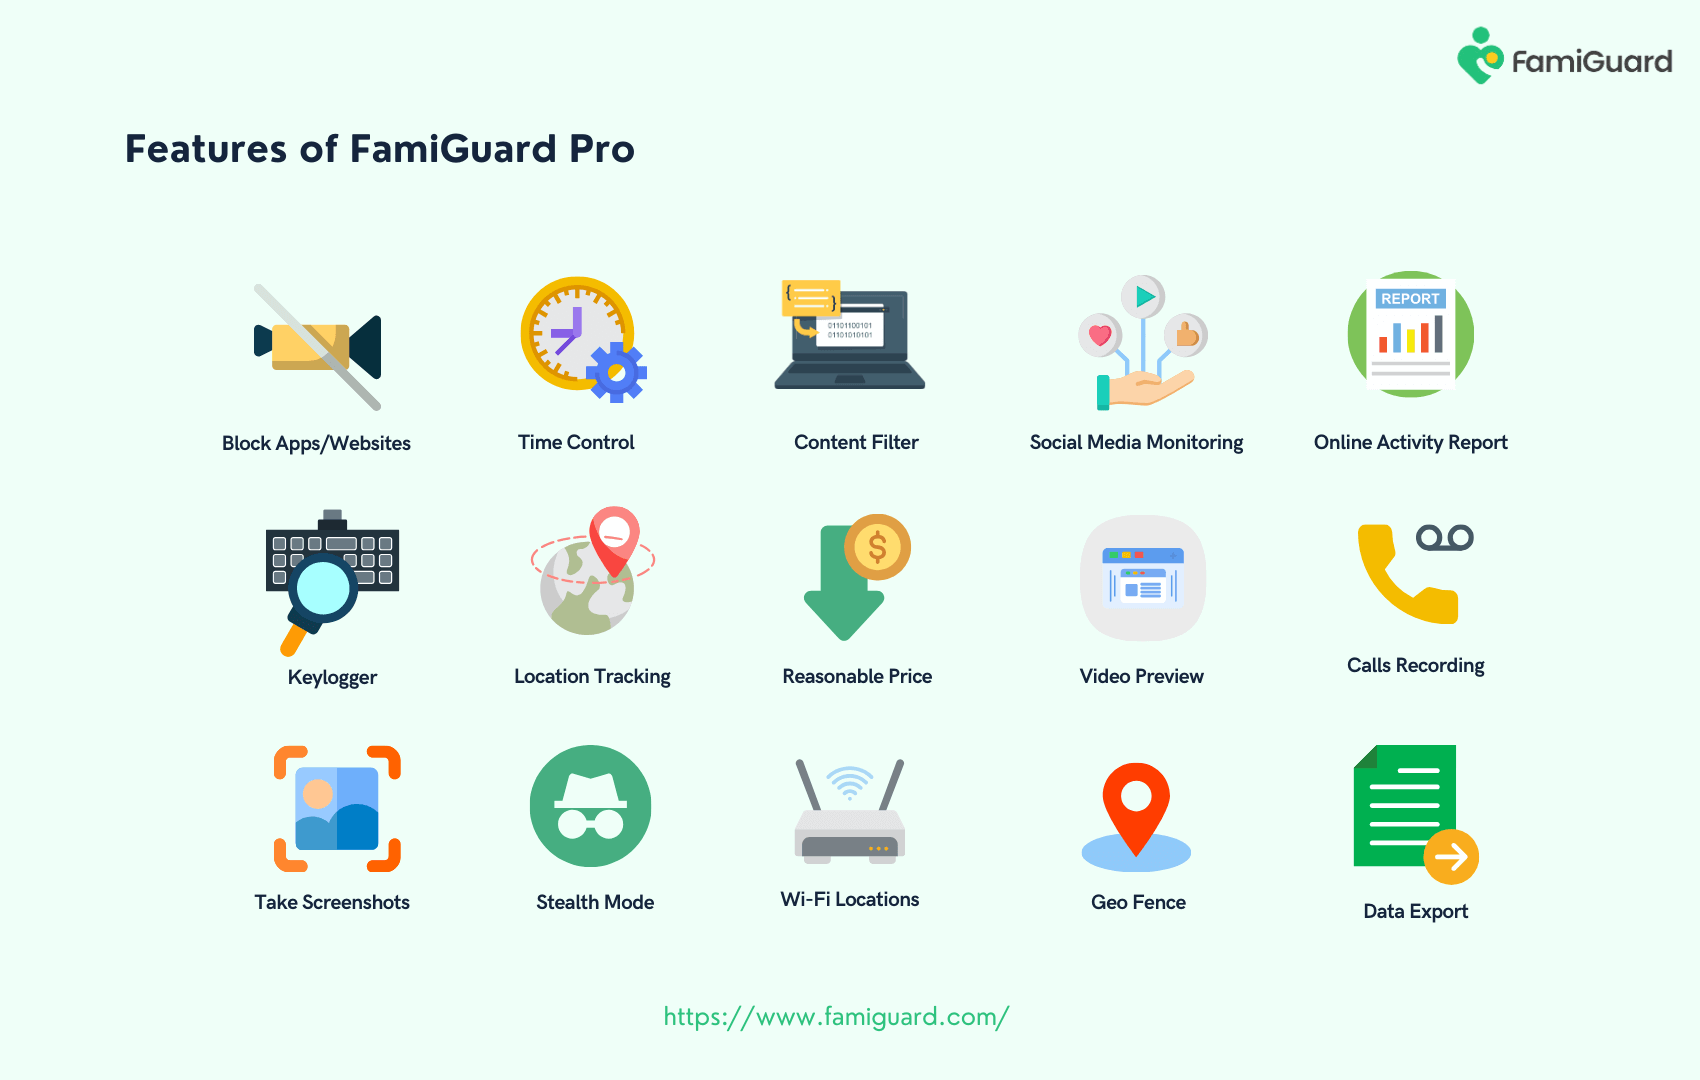 Features of FamiGuard Pro